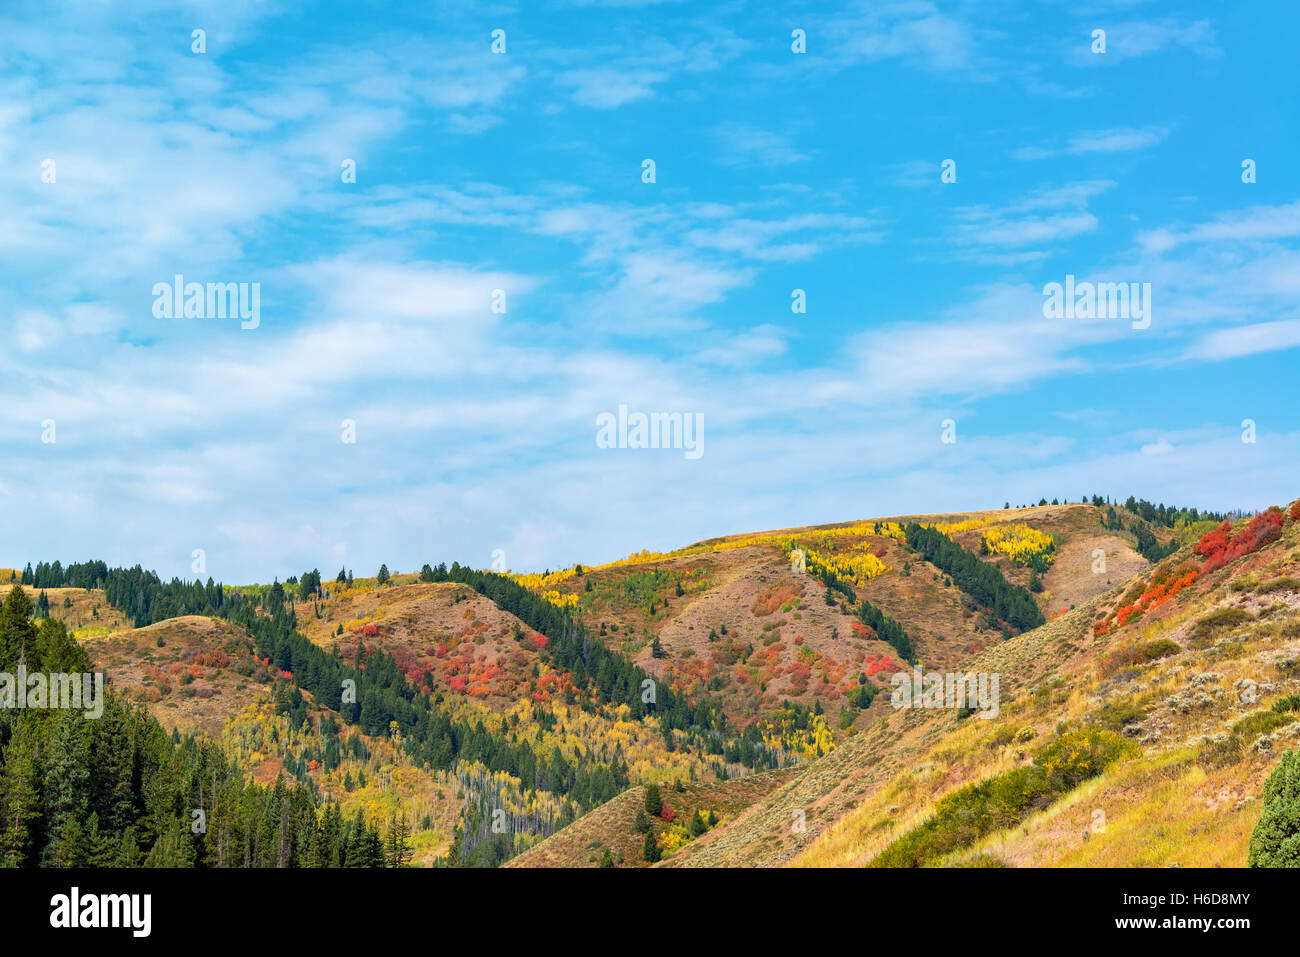 Beautiful colorful hills in southern Wyoming with red, yellow, orange, and green foliage set against a blue sky Stock Photo